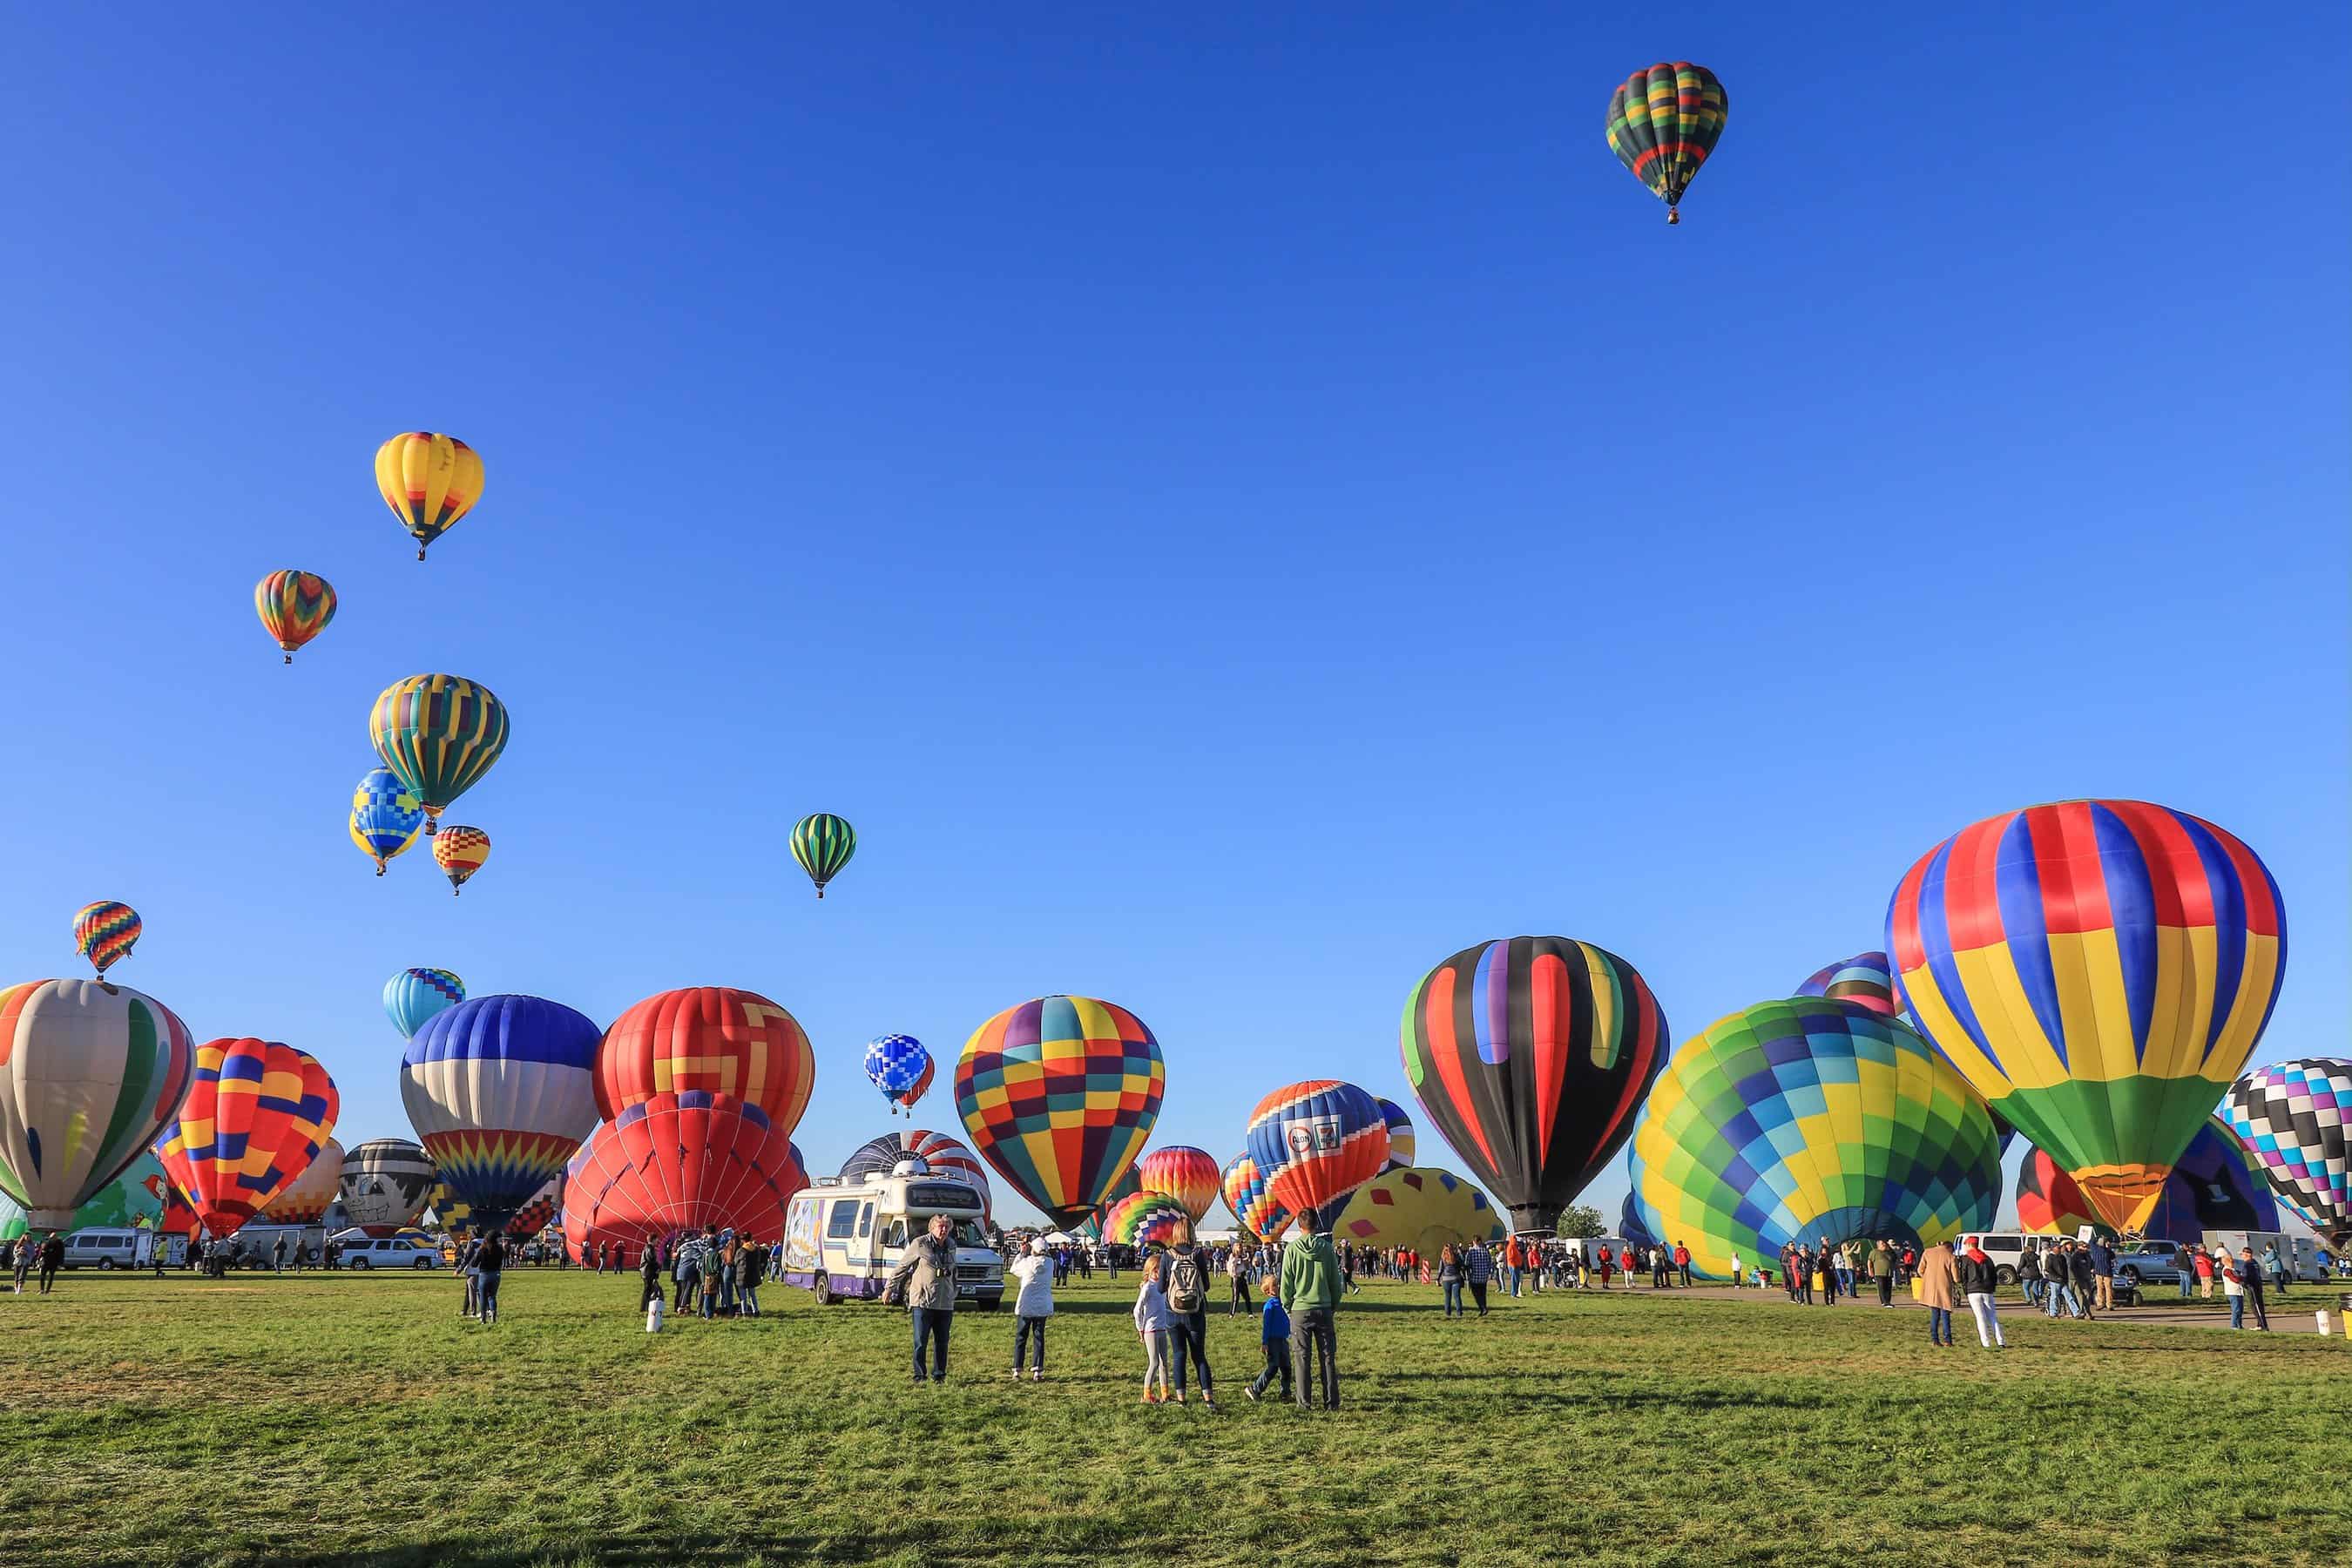 A festive scene at the Albuquerque International Balloon Fiesta in New Mexico, with a vibrant array of hot air balloons rising against a clear blue sky as onlookers marvel at the spectacle.